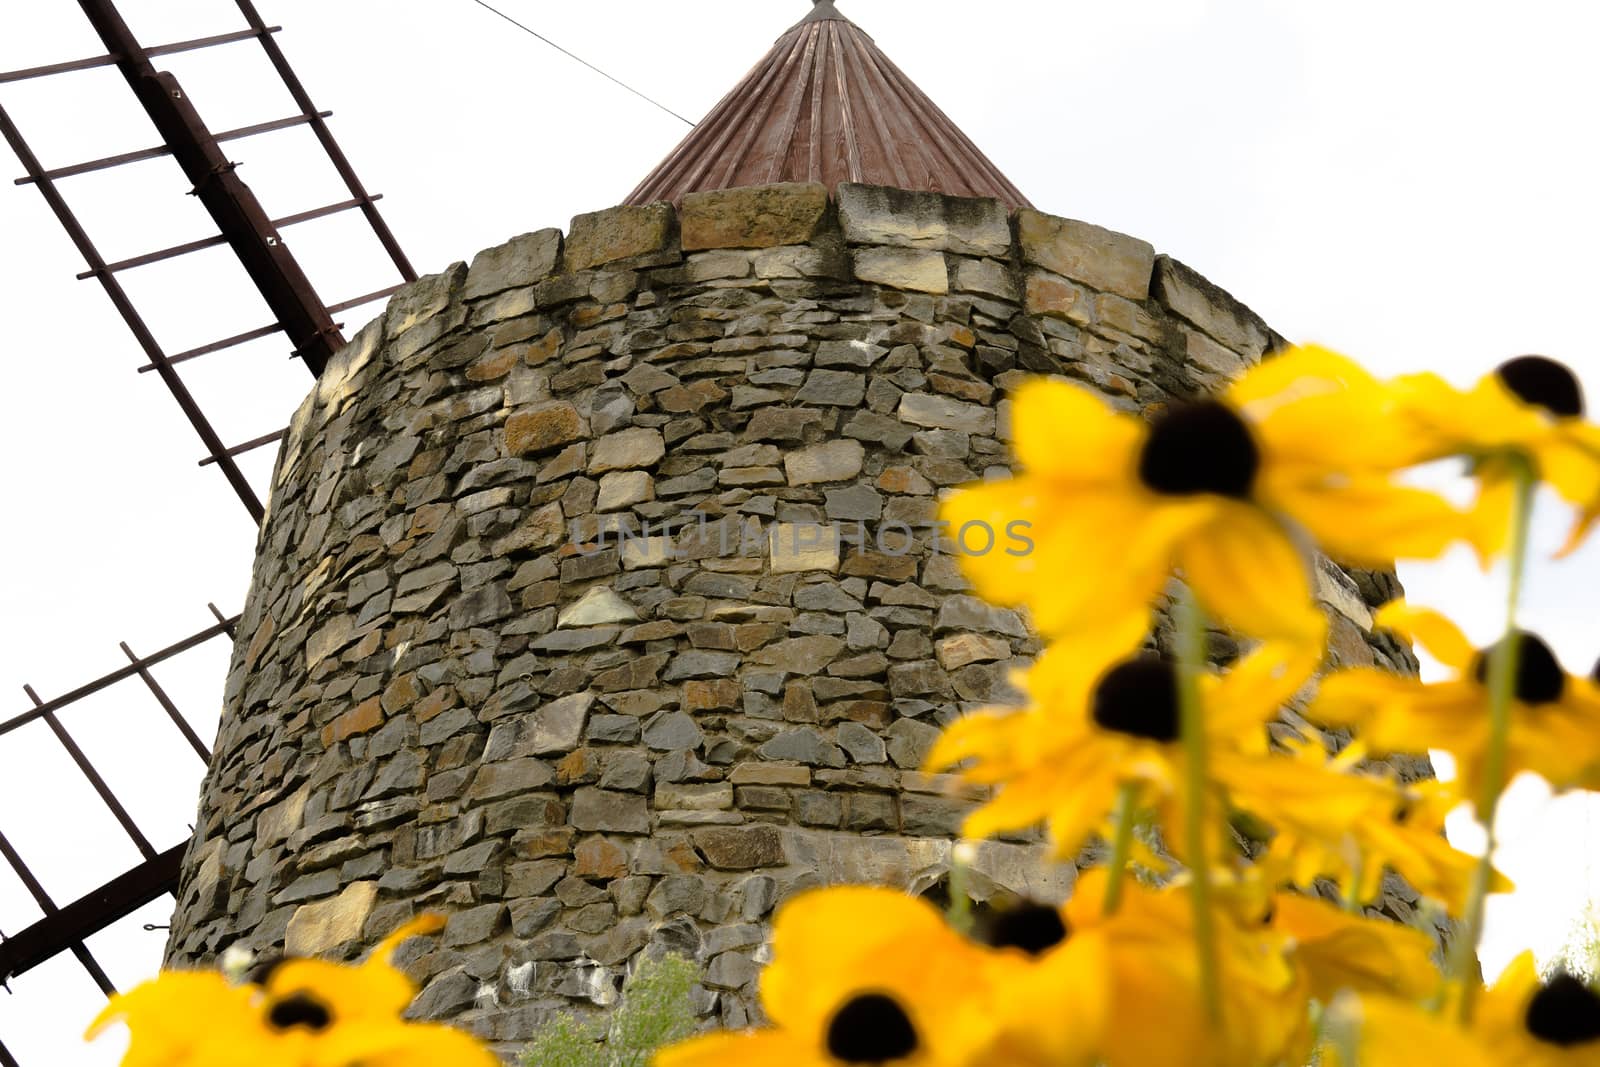 French mill with blurred yellow flowers in the foreground  by geogif